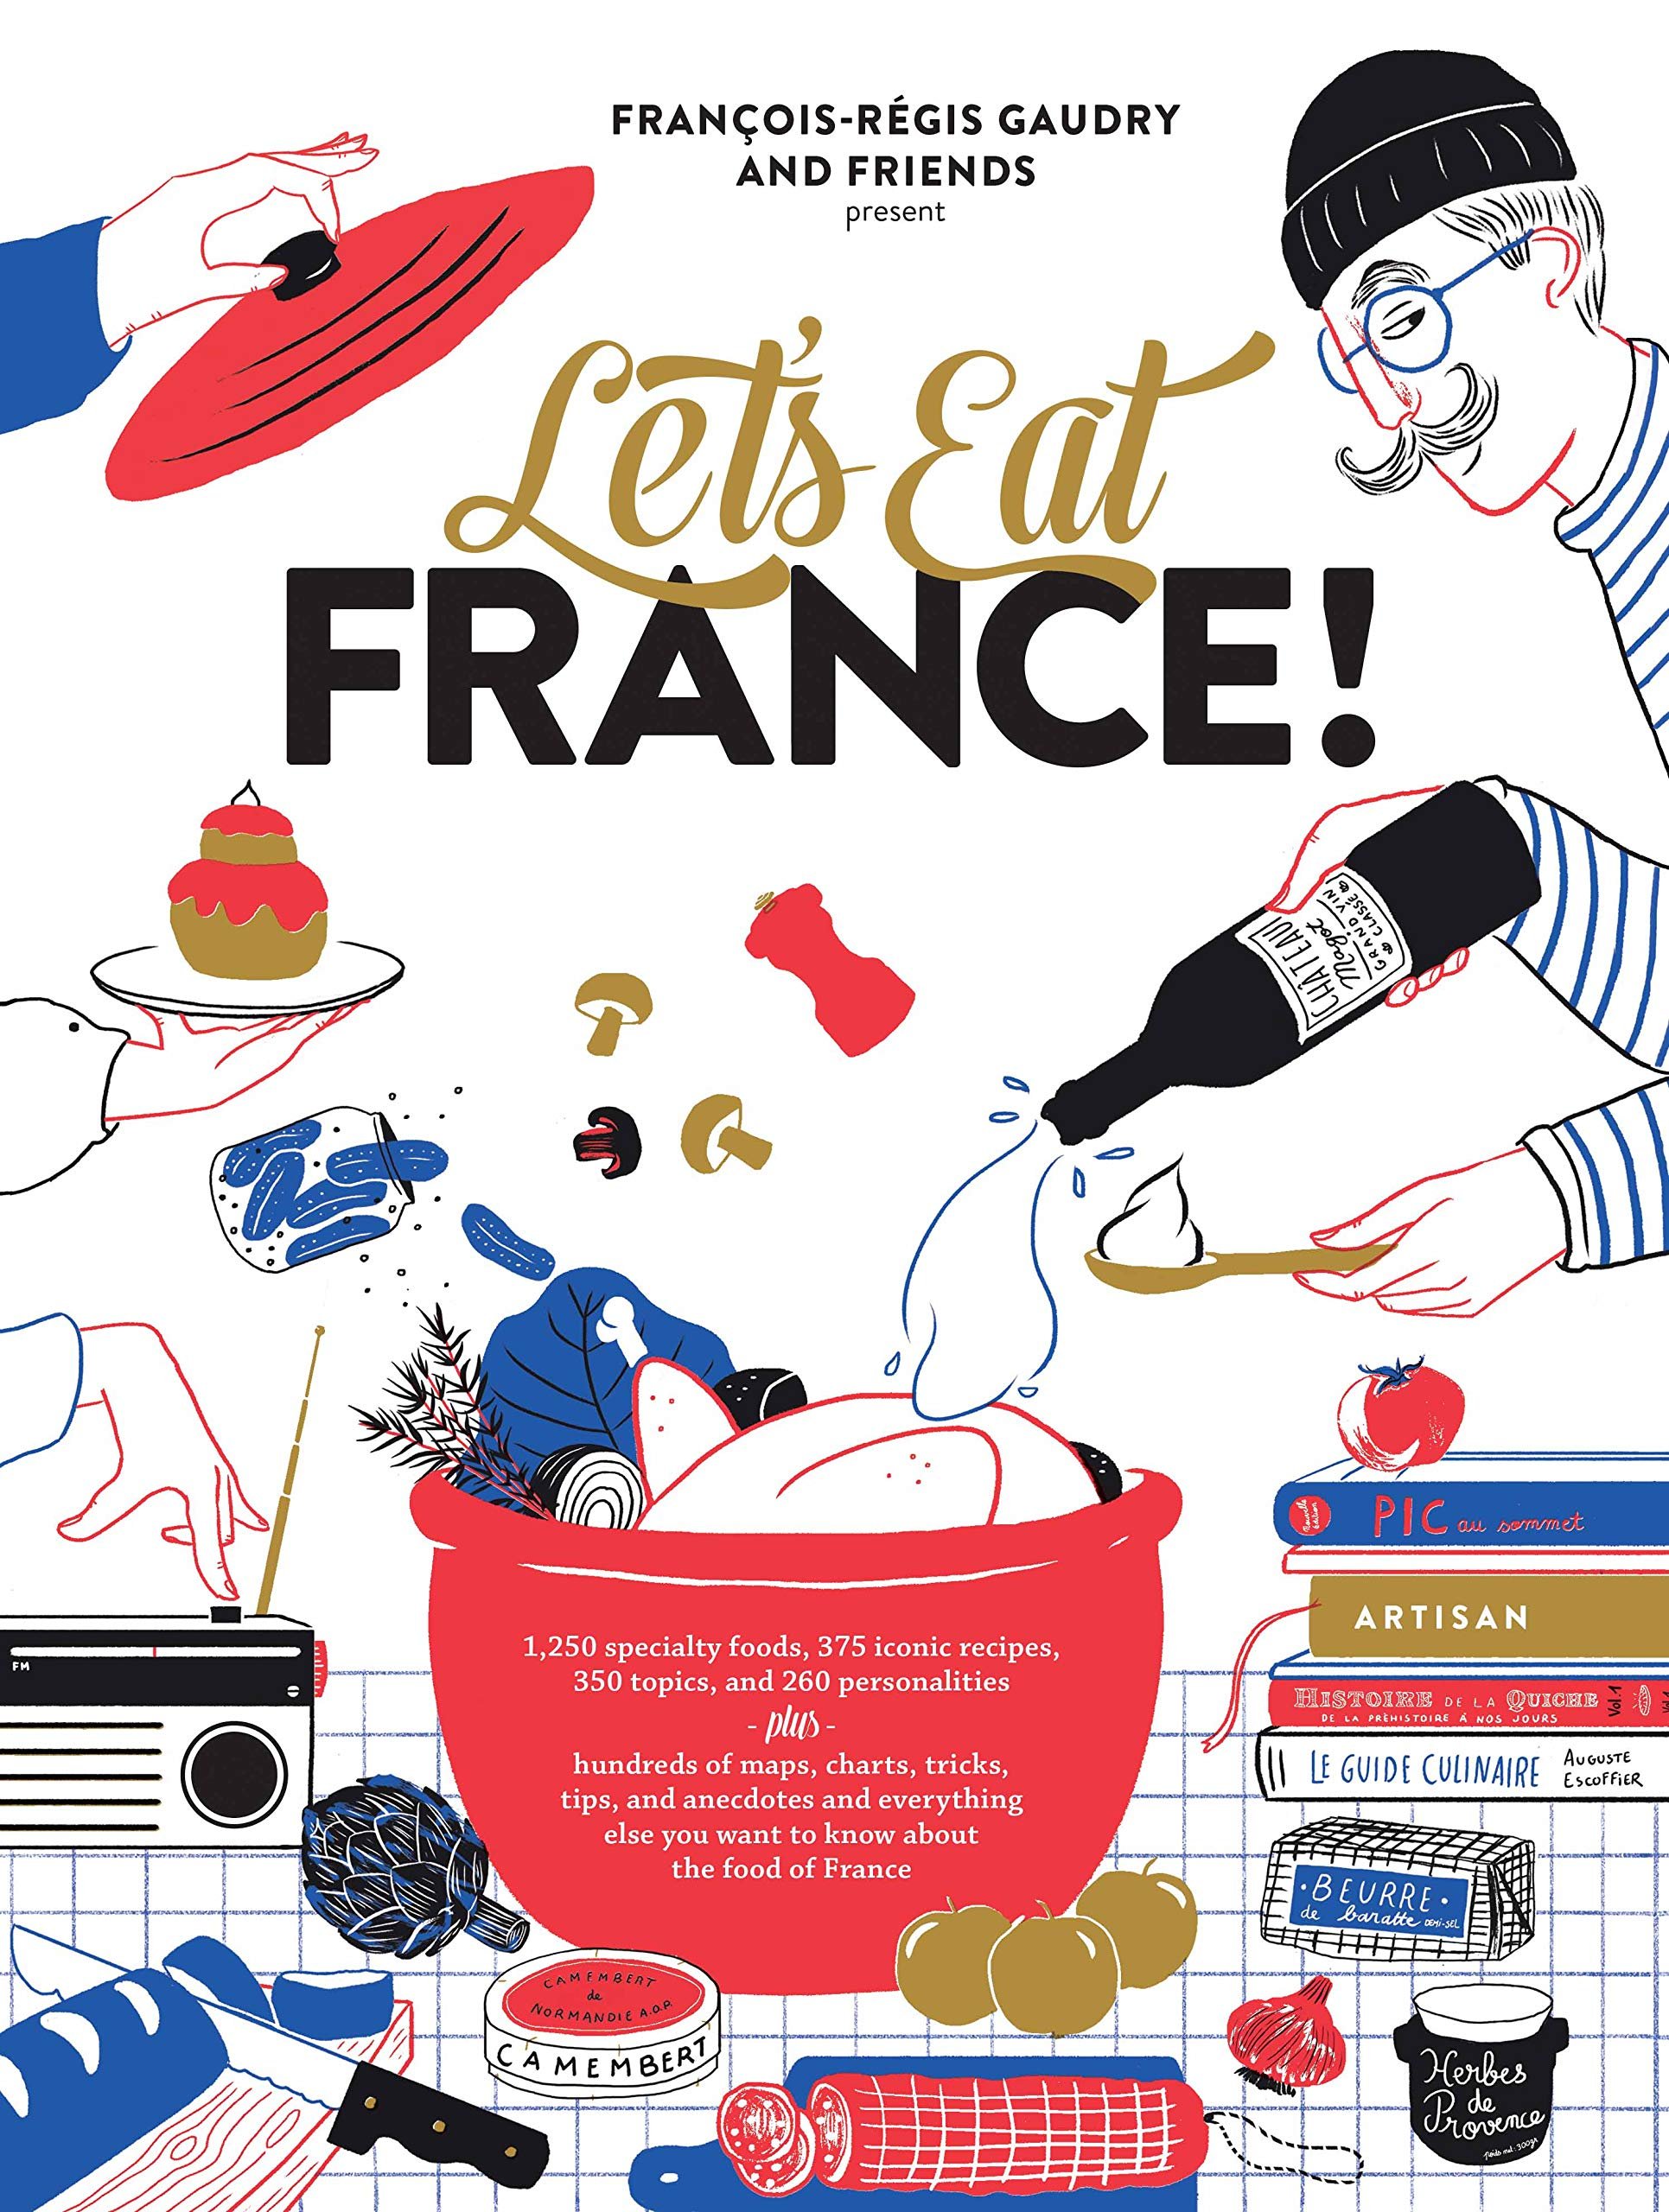 Let's Eat France by Francoise-Regis Gaudry and Friends